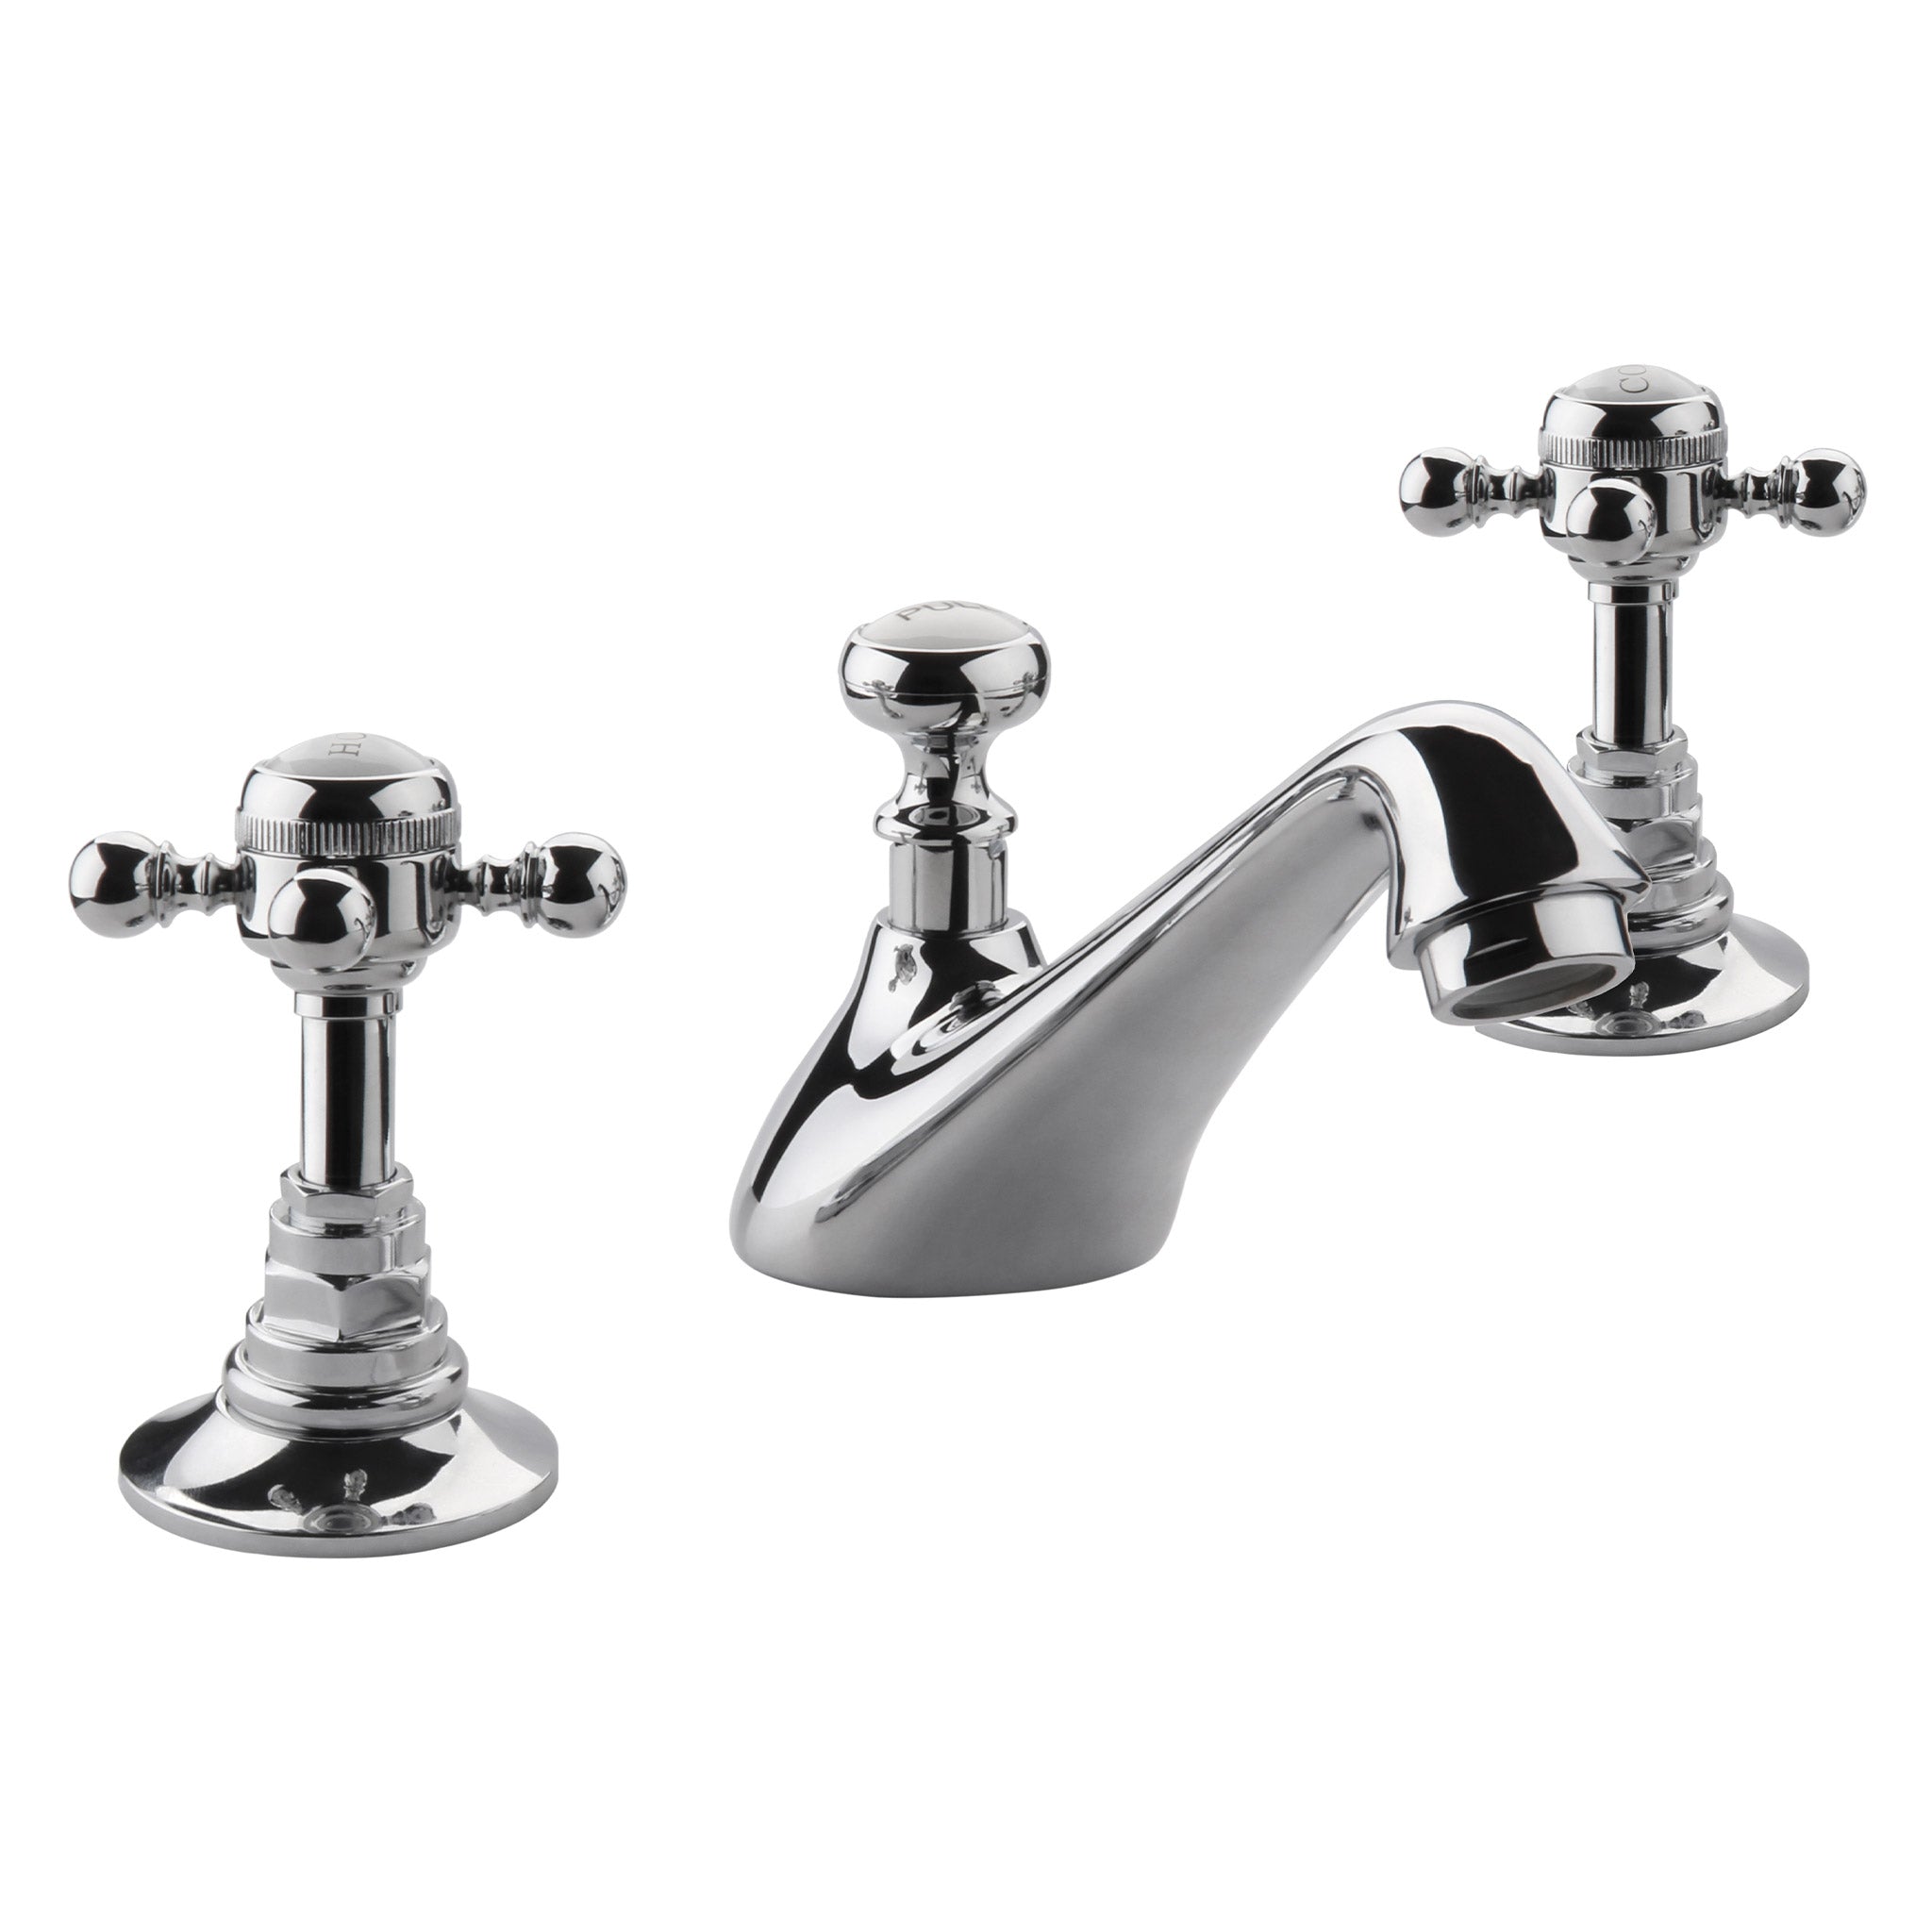 Union Londonia 3 Taphole Basin Mixer Tap & Pop-Up Waste